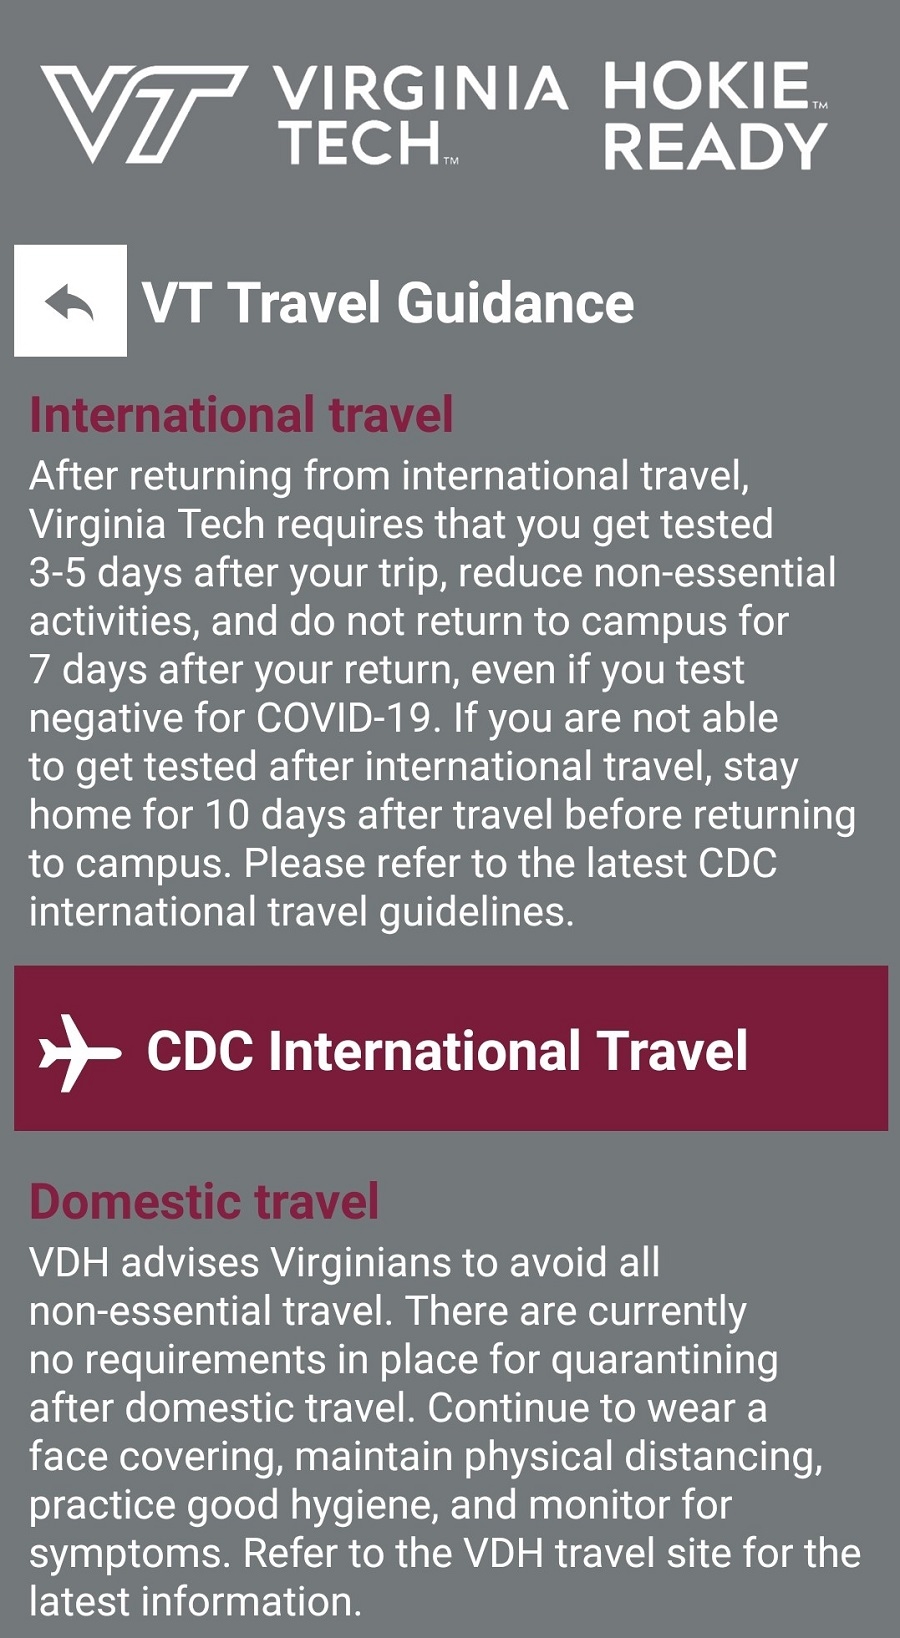 screenshot within app of latest CDC travel guidance for international and domestic travel